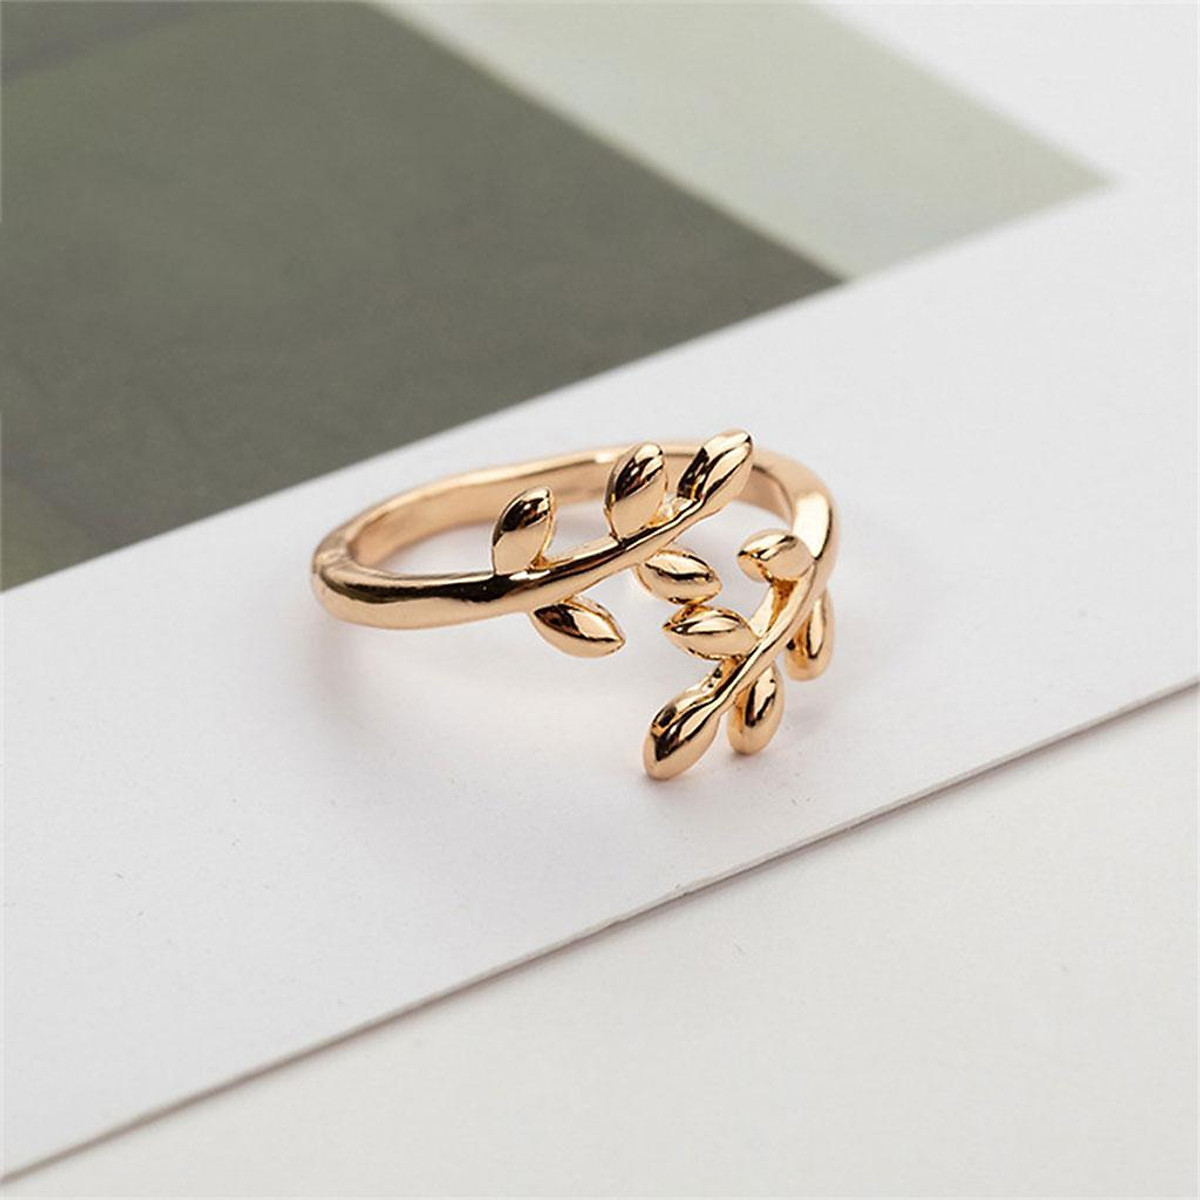 Open ring adjustable ring woman in steel gilded with fine gold laurel leaf